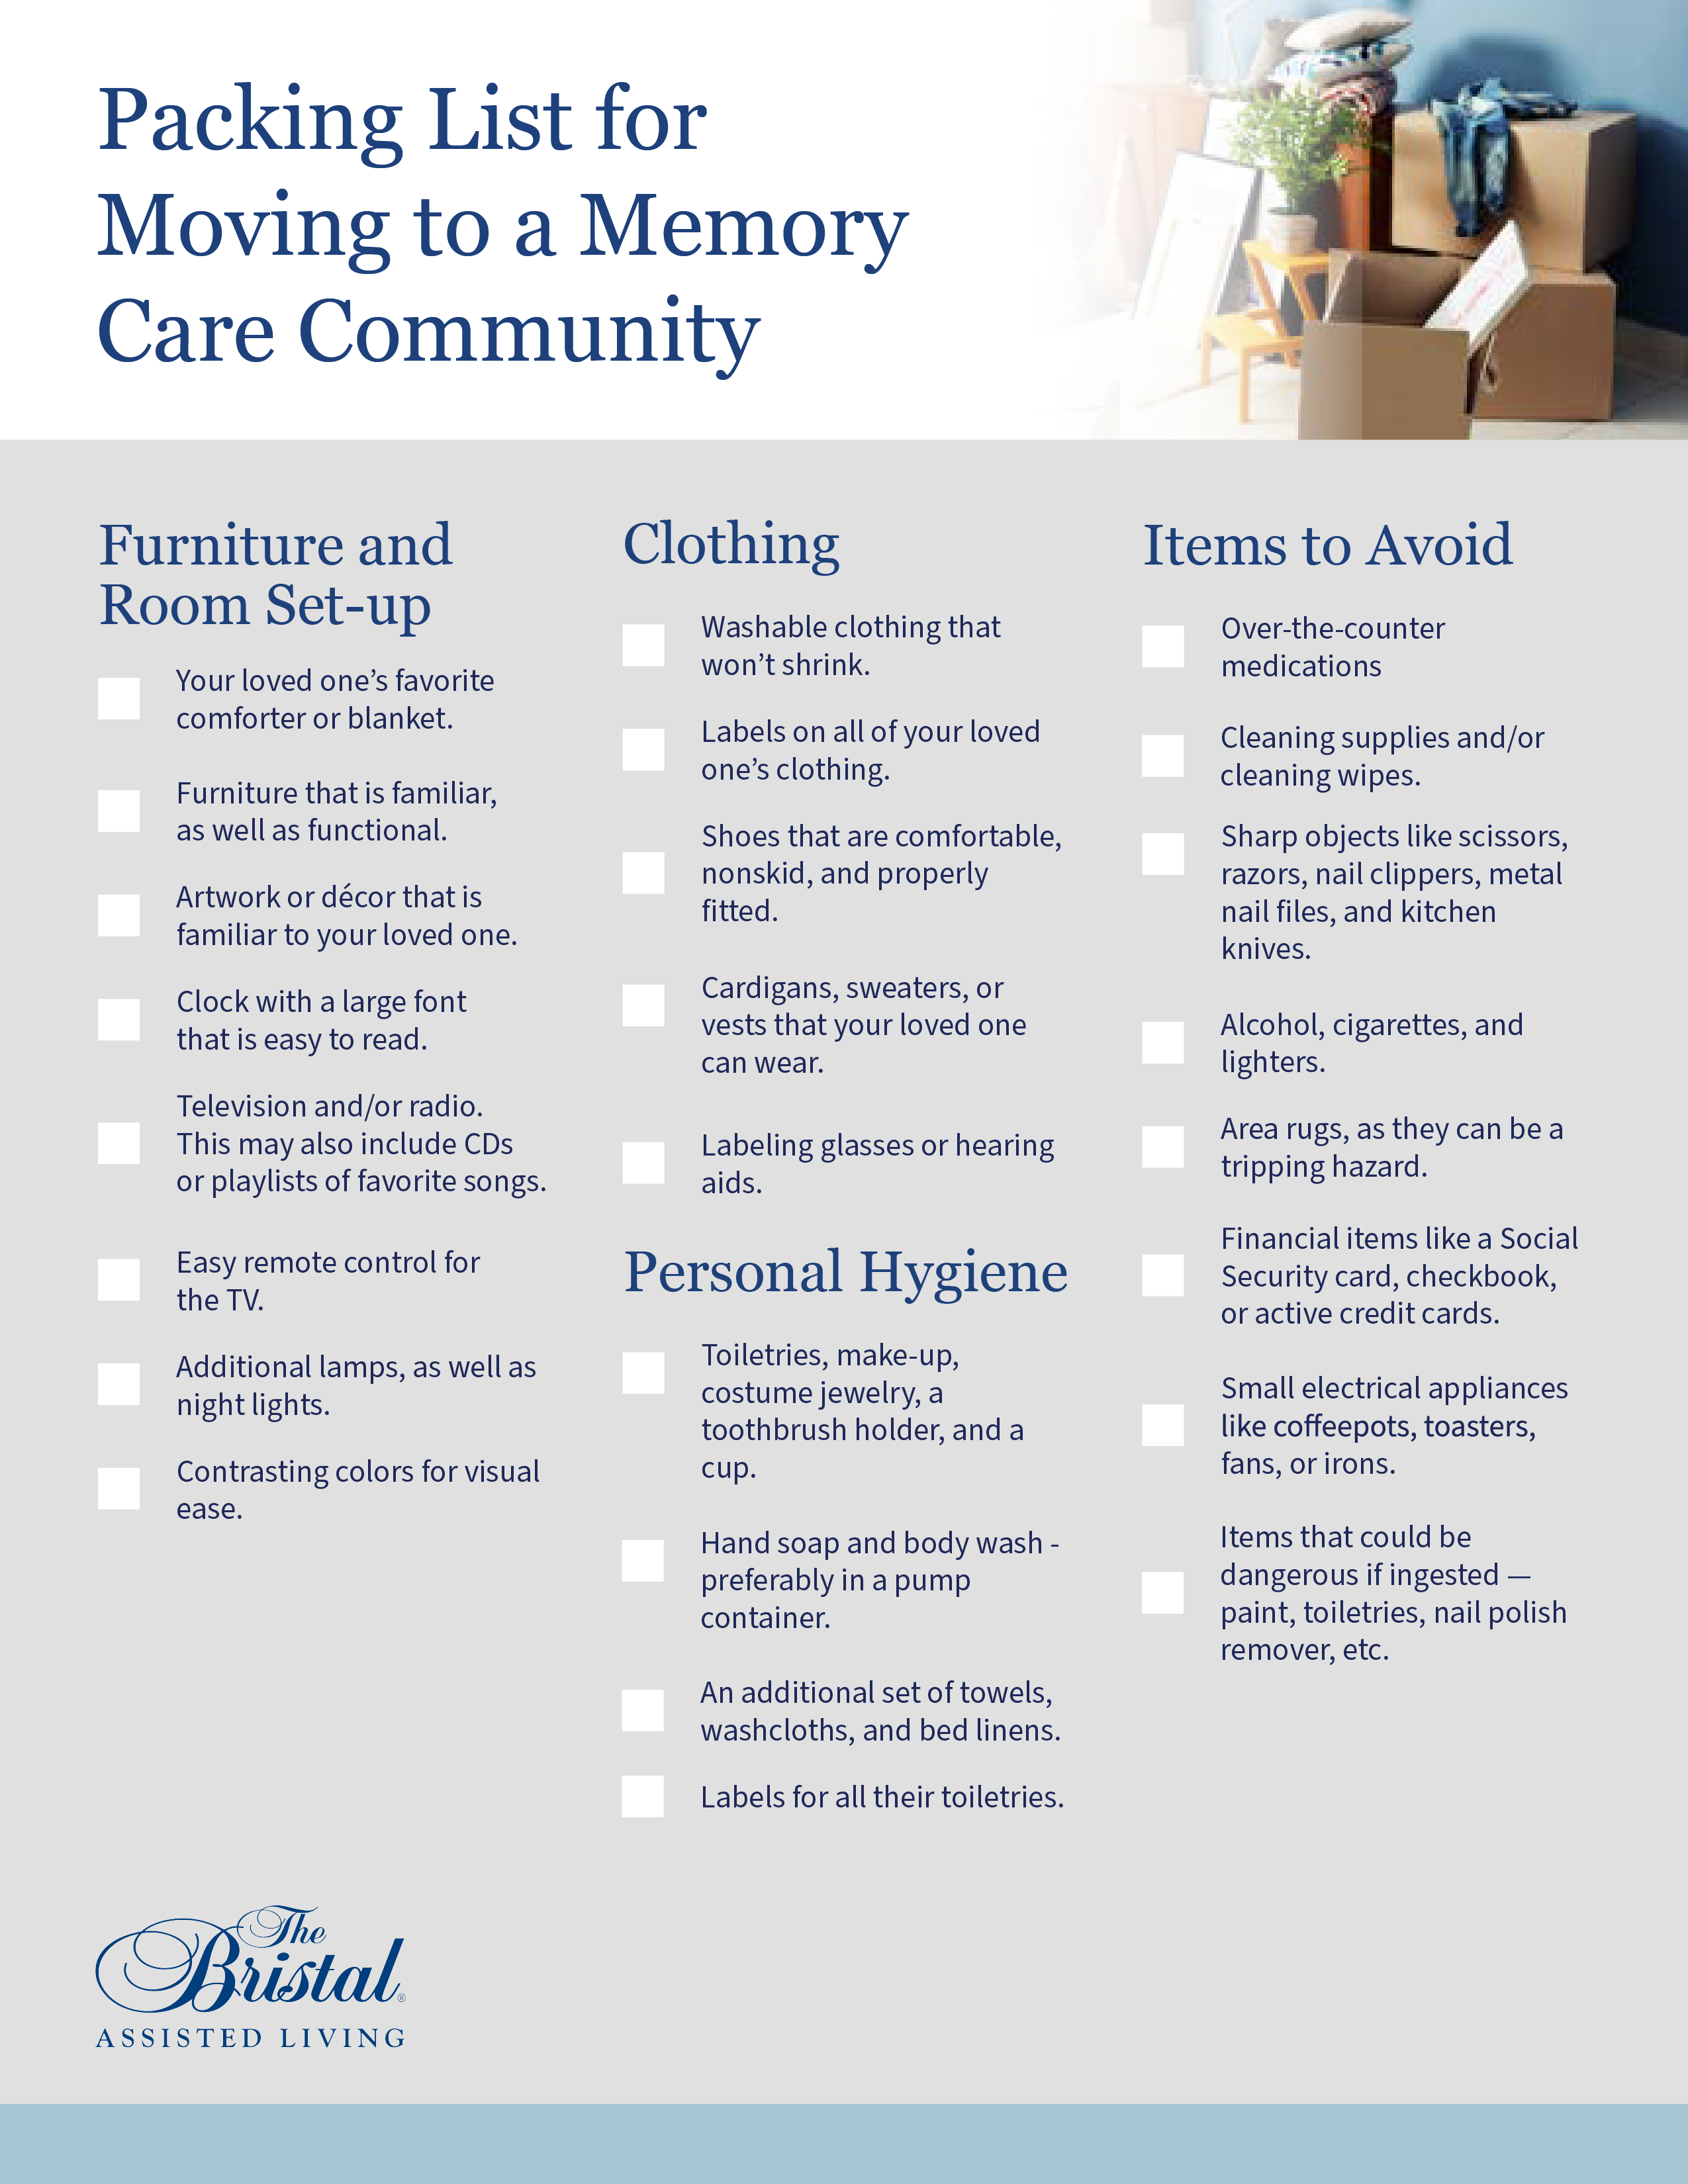 A memory care packing checklist.